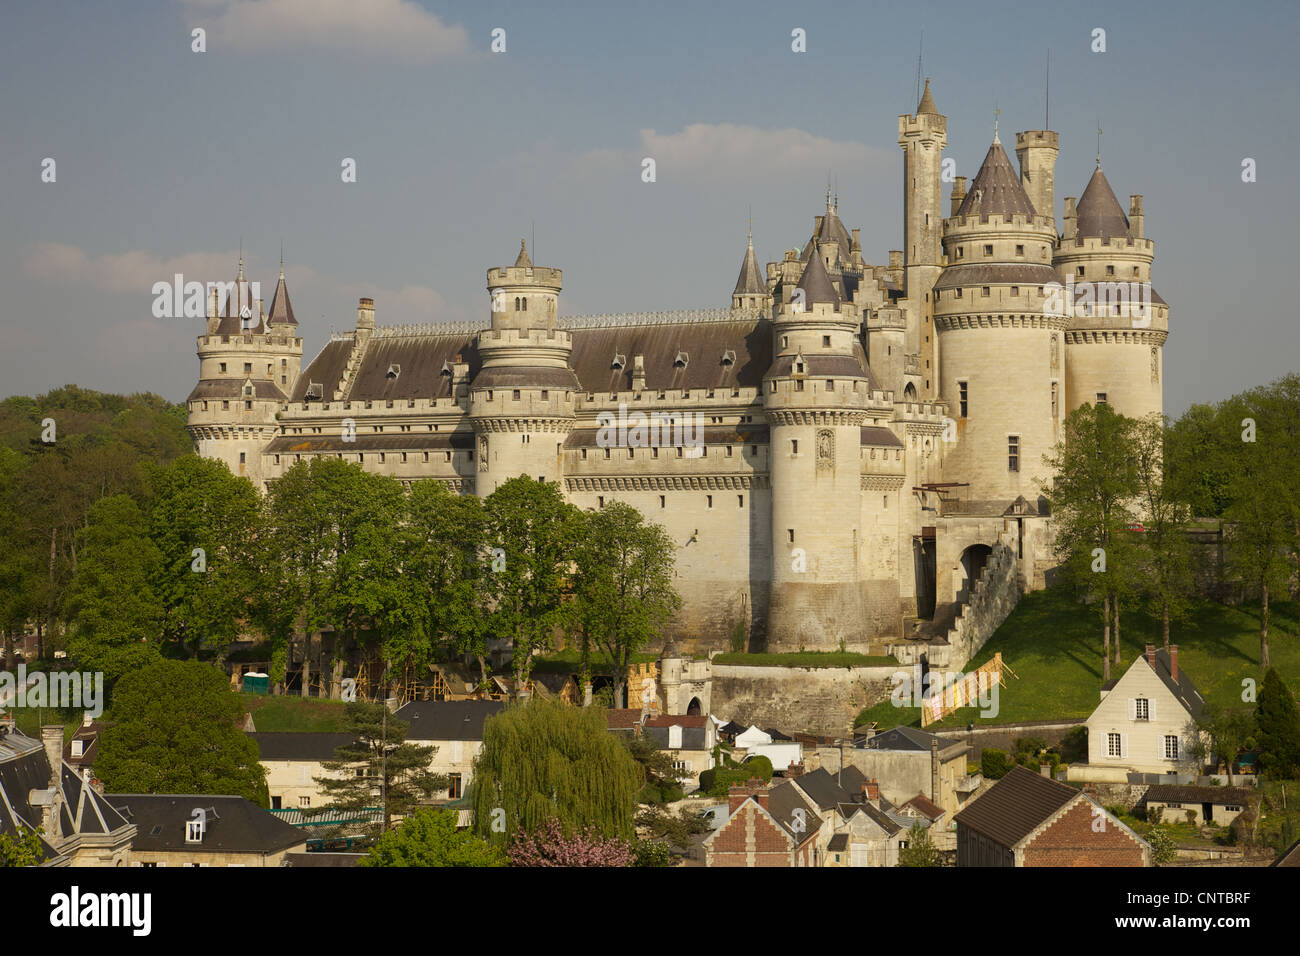 Chateau De Pierrefonds, used as Camelot in the BBC tv series Merlin, France  Stock Photo - Alamy